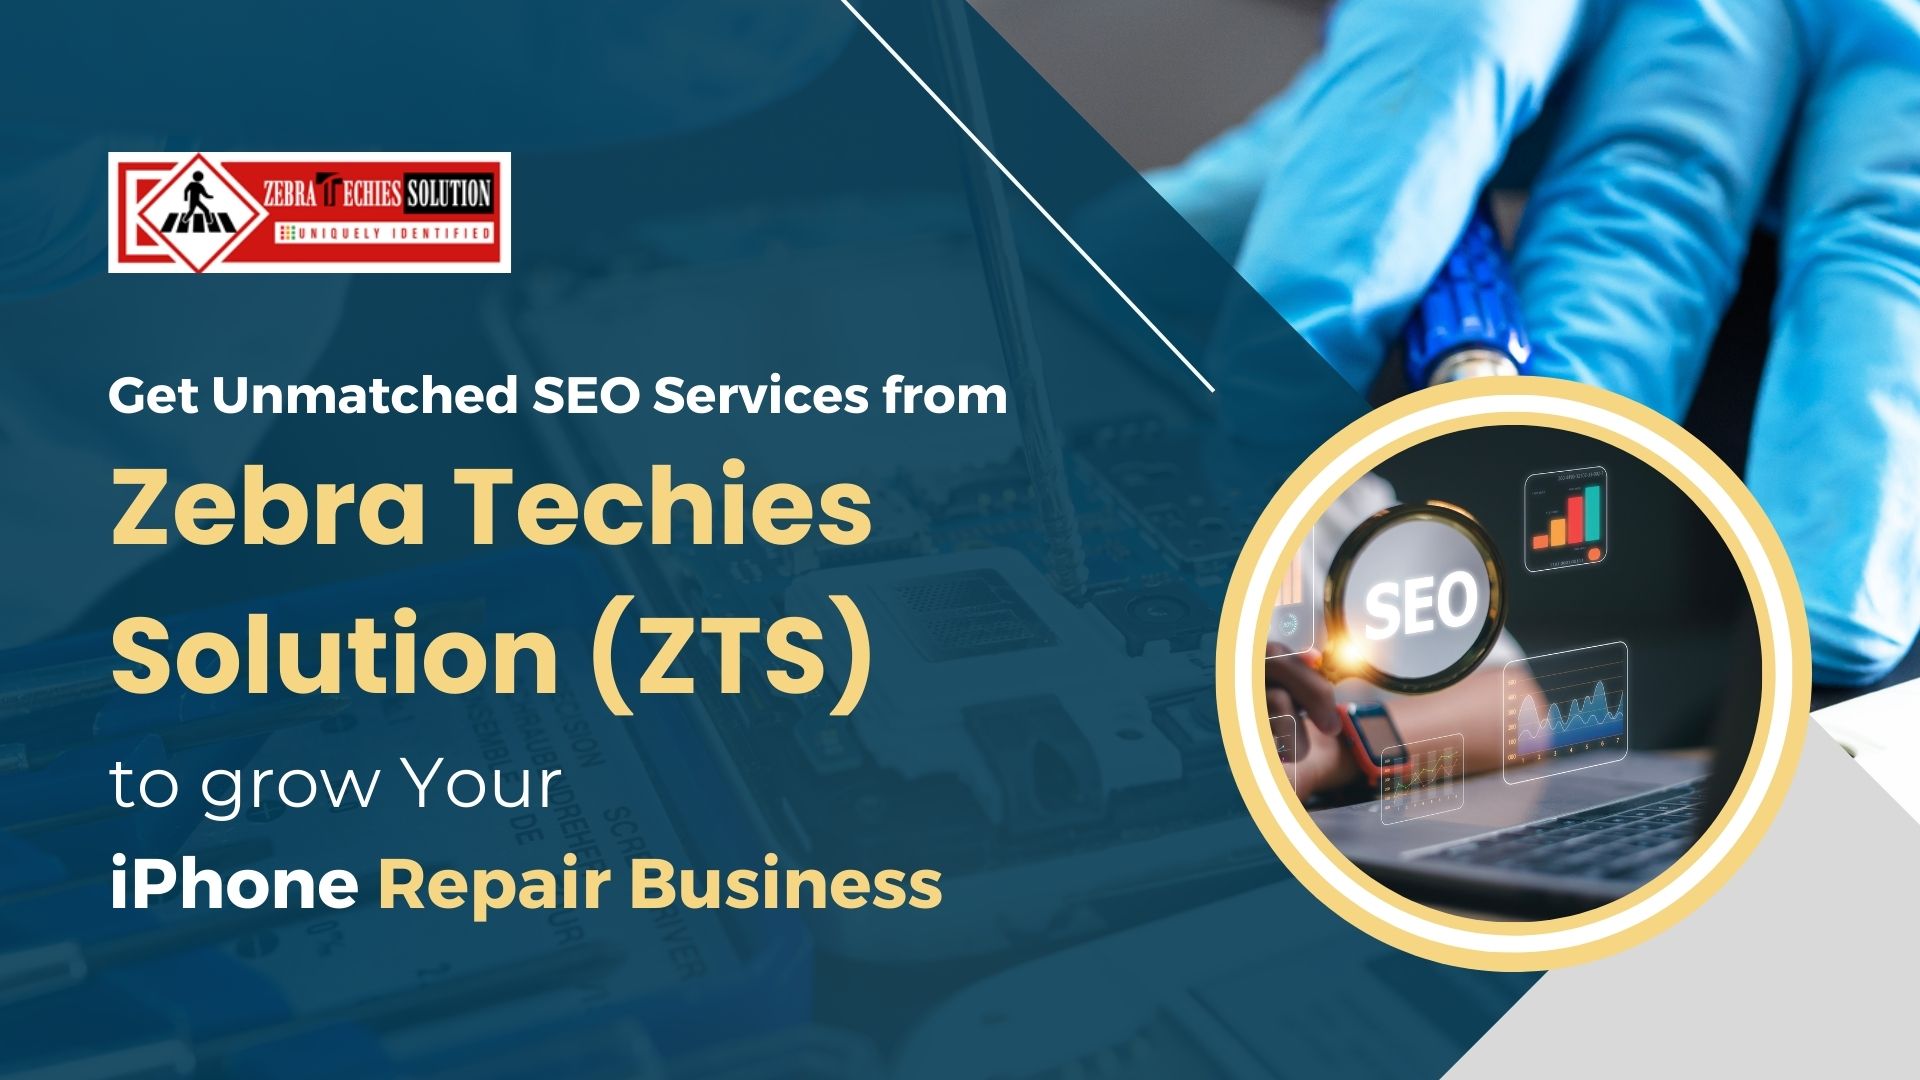 Best SEO Company for iPhone Repairing Business